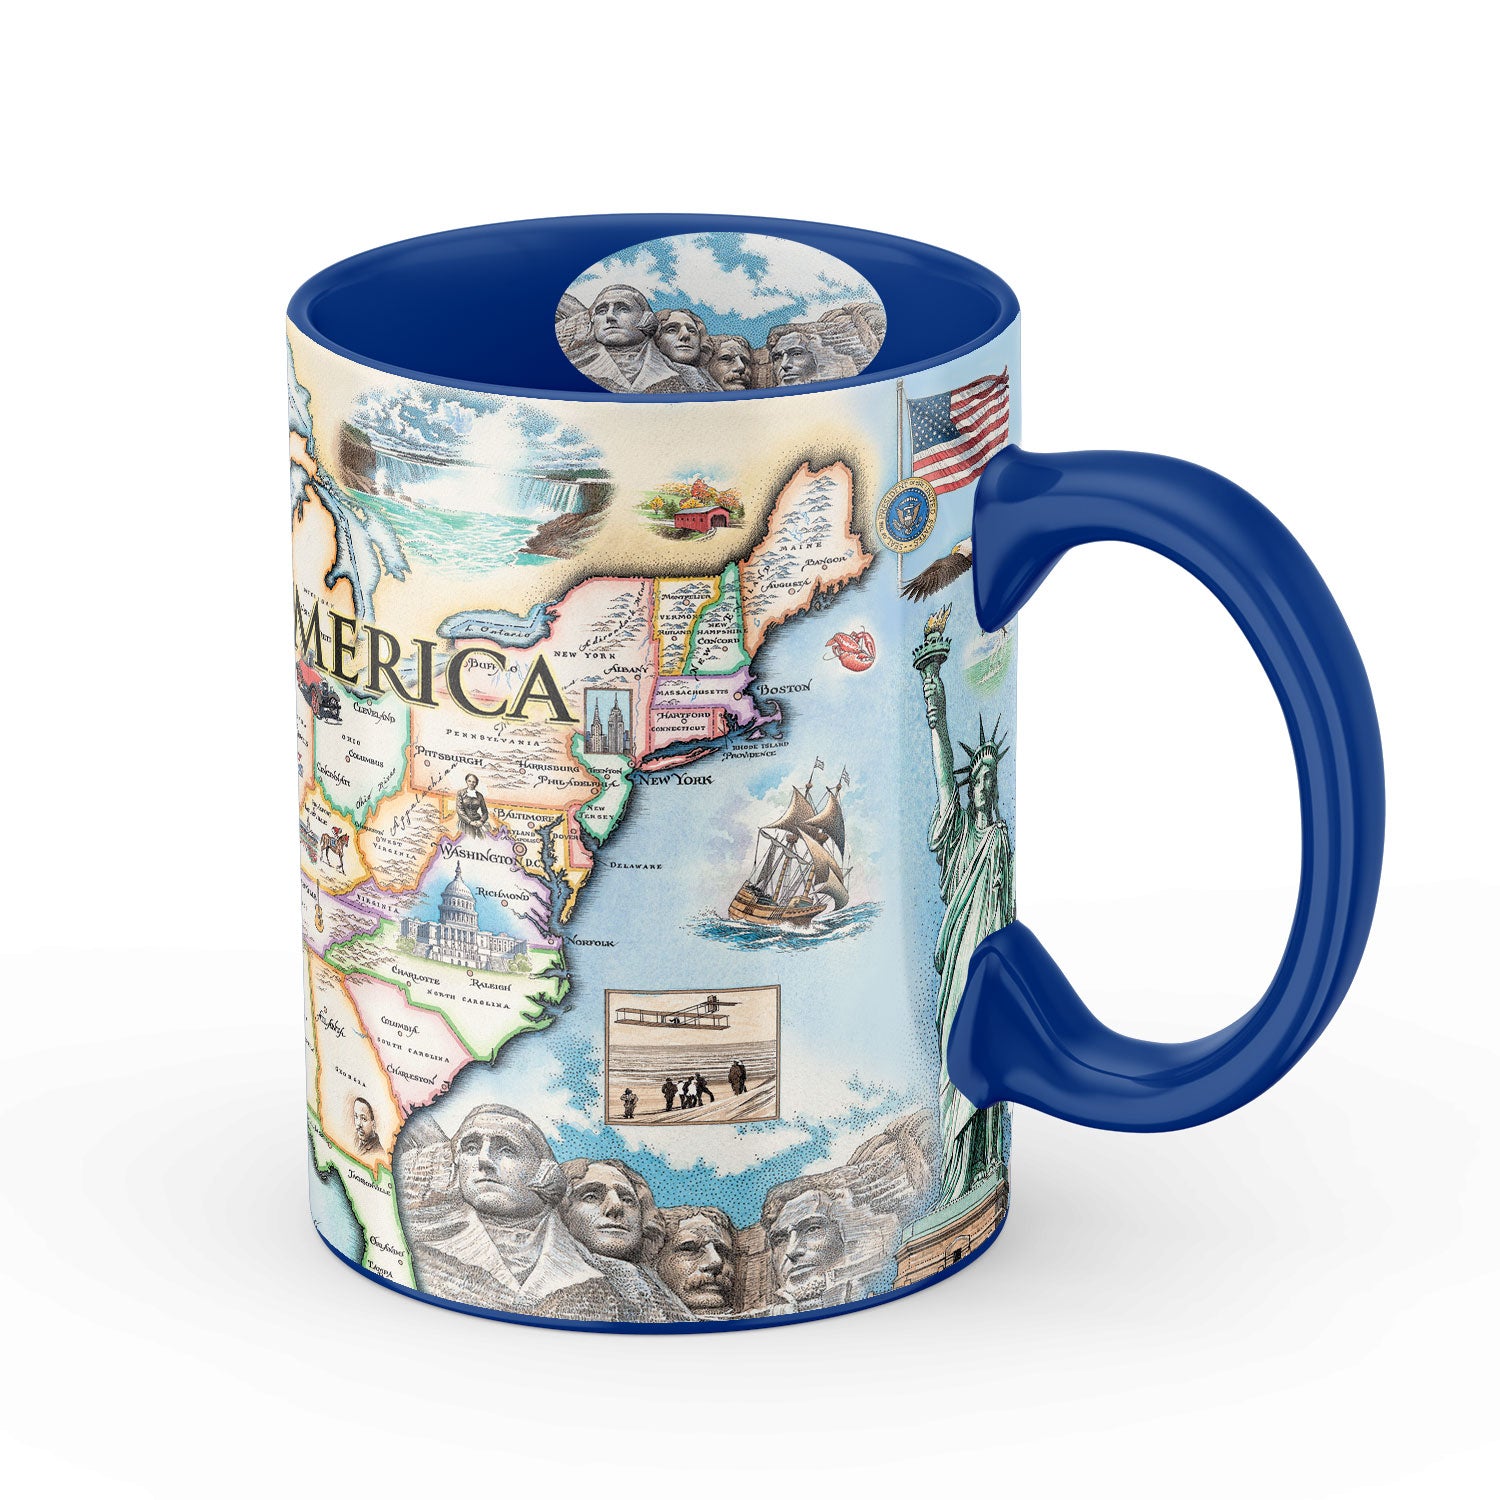 USA Map Ceramic Mug. The map features illustrations of significance from each state in the United States of America. Including a bald eagle, Elvis, bison, the Golden Gate Bridge, the Space Needle, Niagra Falls, and the Alamo. 